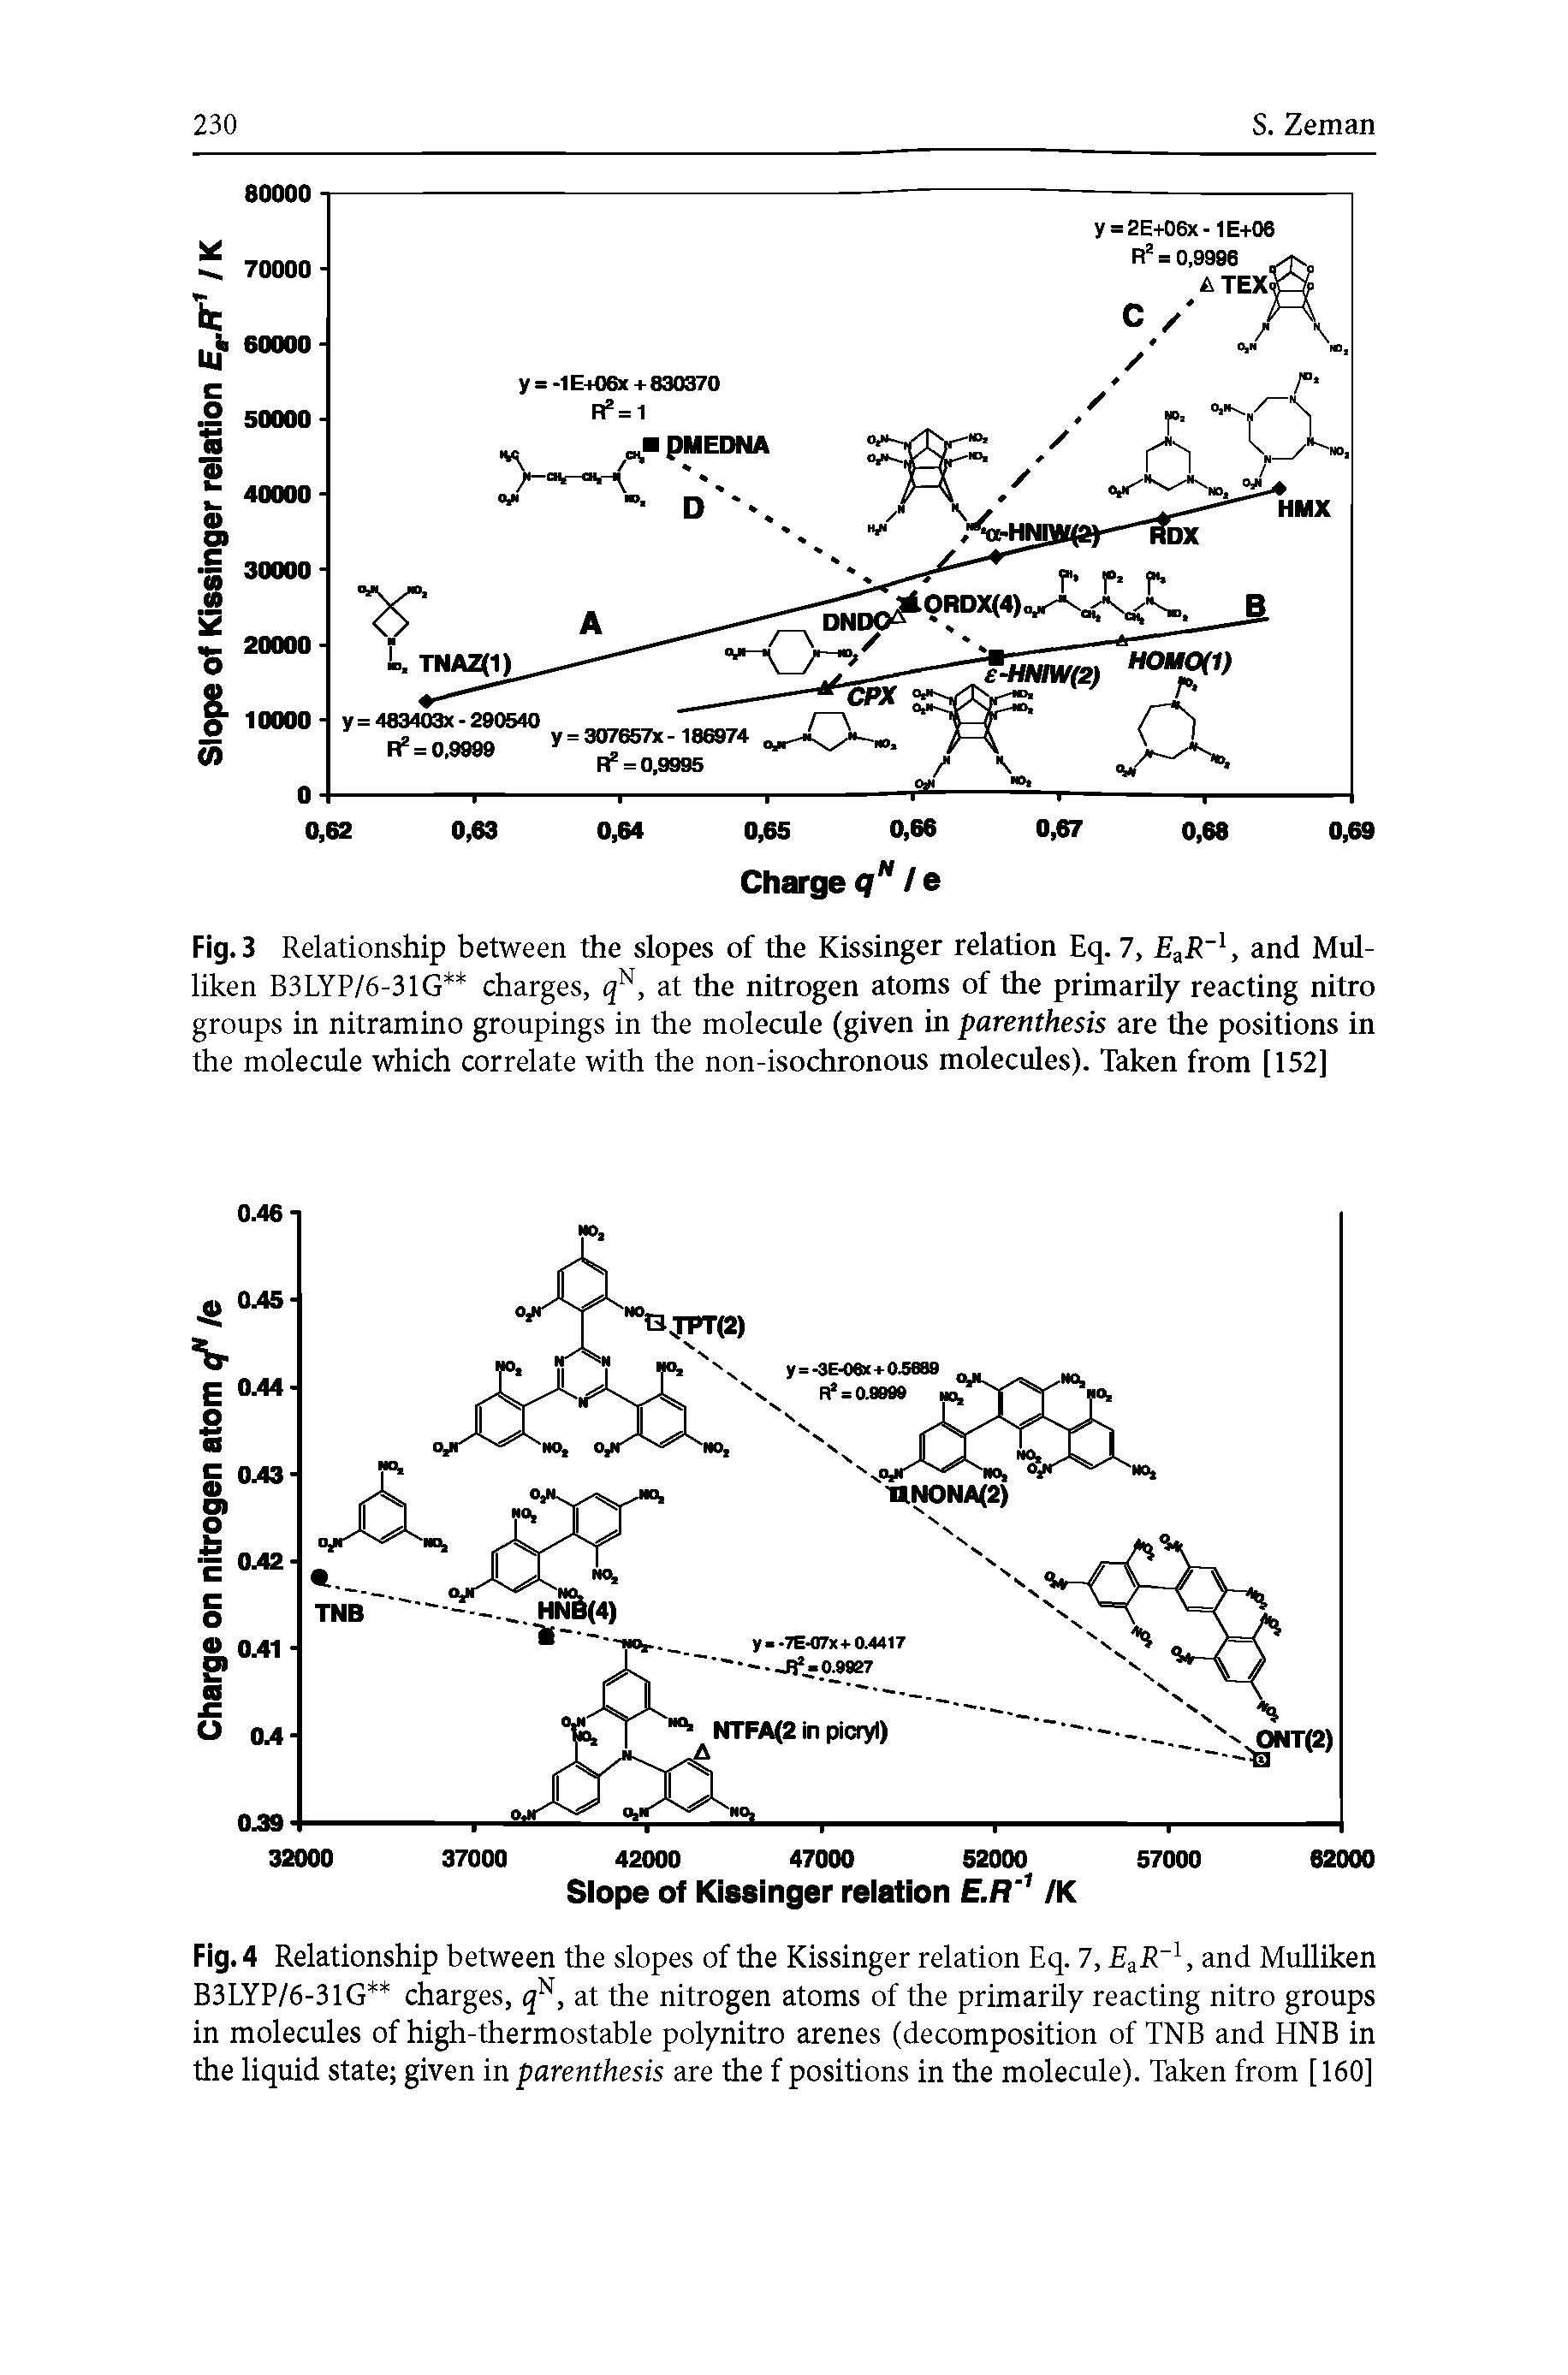 Fig. 4 Relationship between the slopes of the Kissinger relation Eq. 7, EaR, and MuUiken B3LYP/6-31G charges, q, at the nitrogen atoms of the primarily reacting nitro groups in molecules of high-thermostable polynitro arenes (decomposition of TNB and HNB in the liquid state given in parenthesis are the f positions in the molecule). Taken from [ 160]...